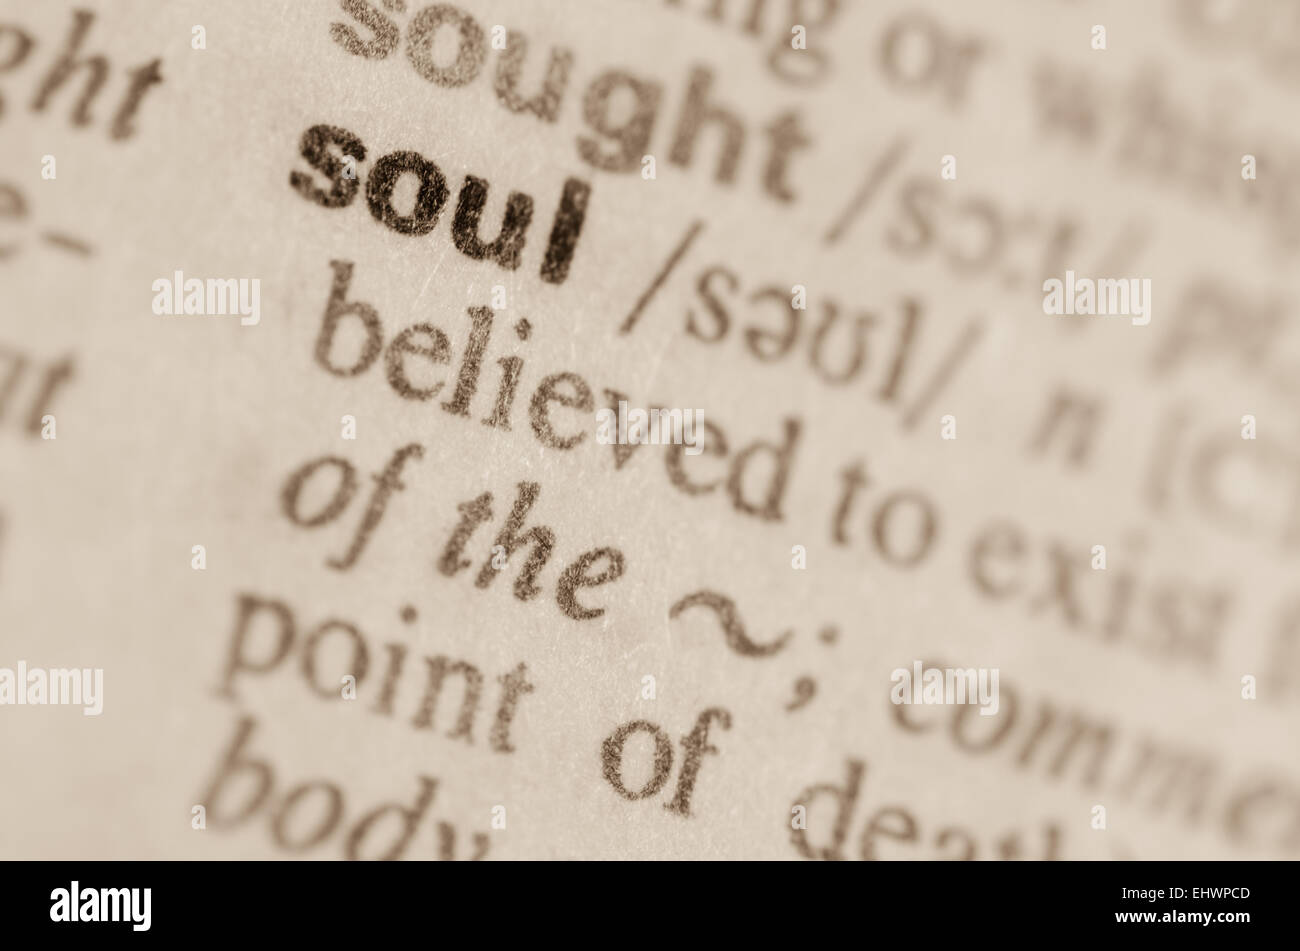 Definition of word soul in dictionary Stock Photo